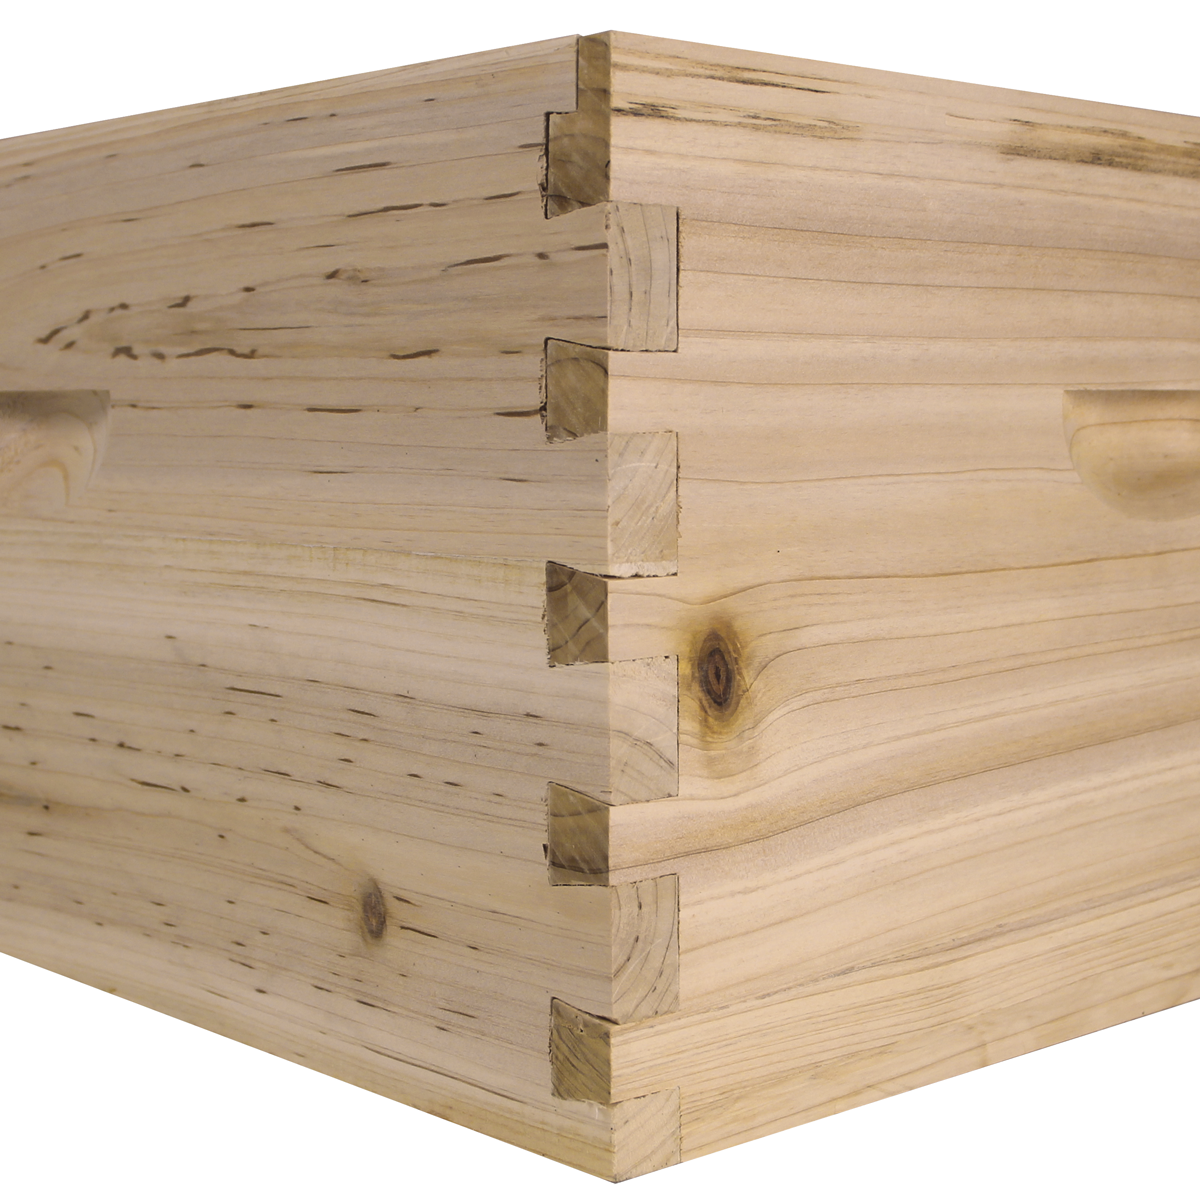 8 Frame Deep Brood Box w/ Dovetail Joints (No Frames)